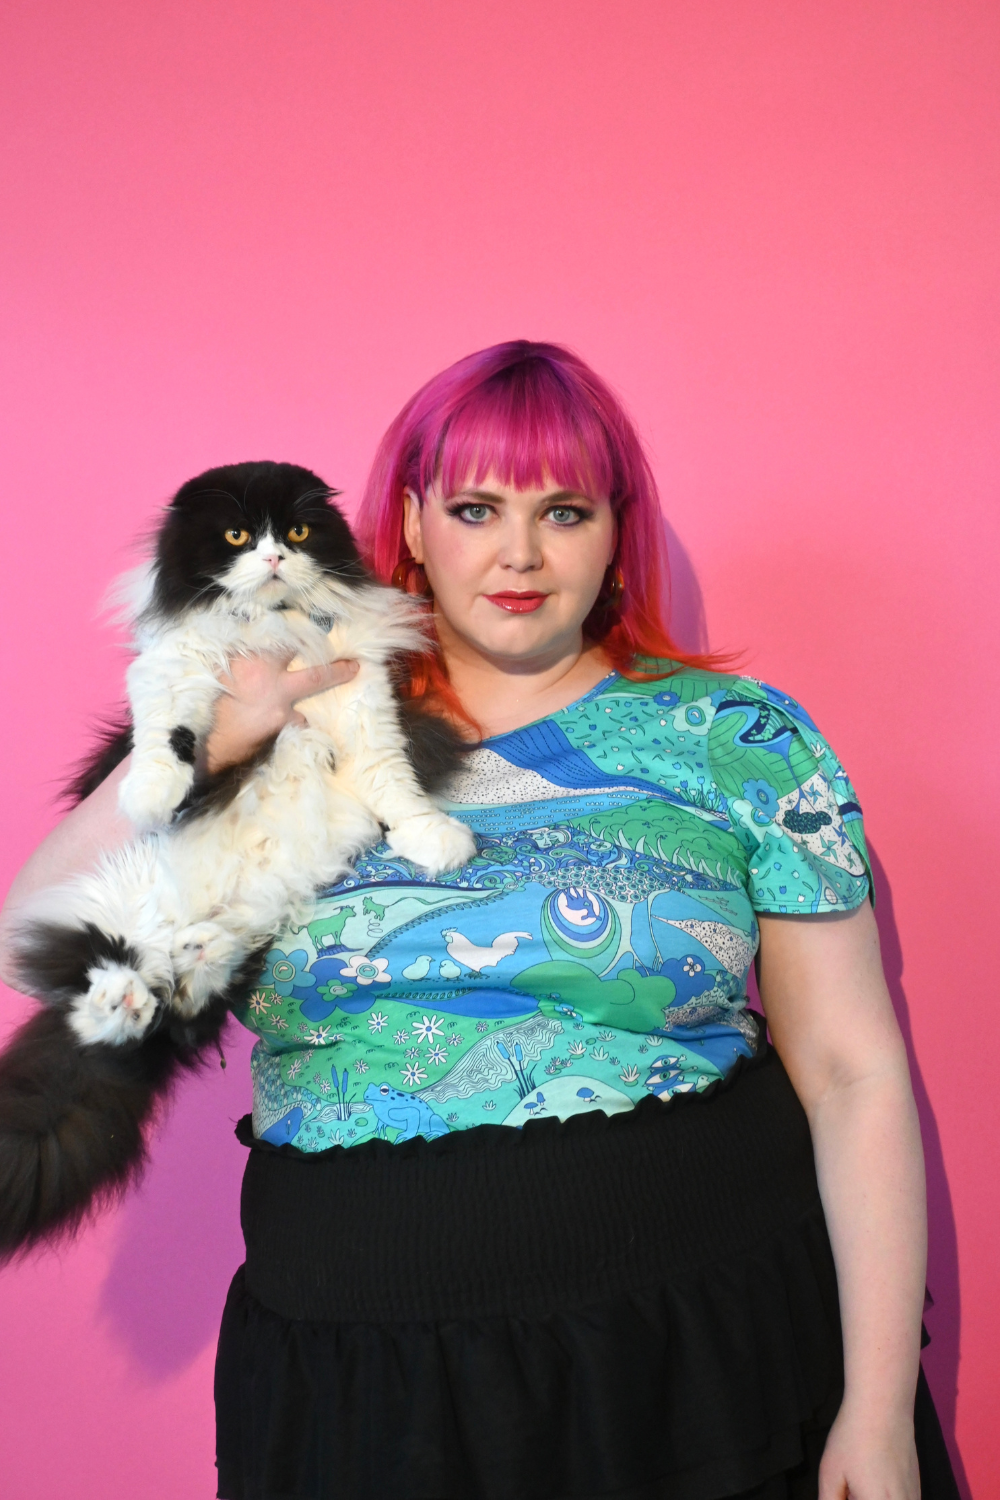 Pink haired model holding cat wearing shirt with landscape graphic in green and blue